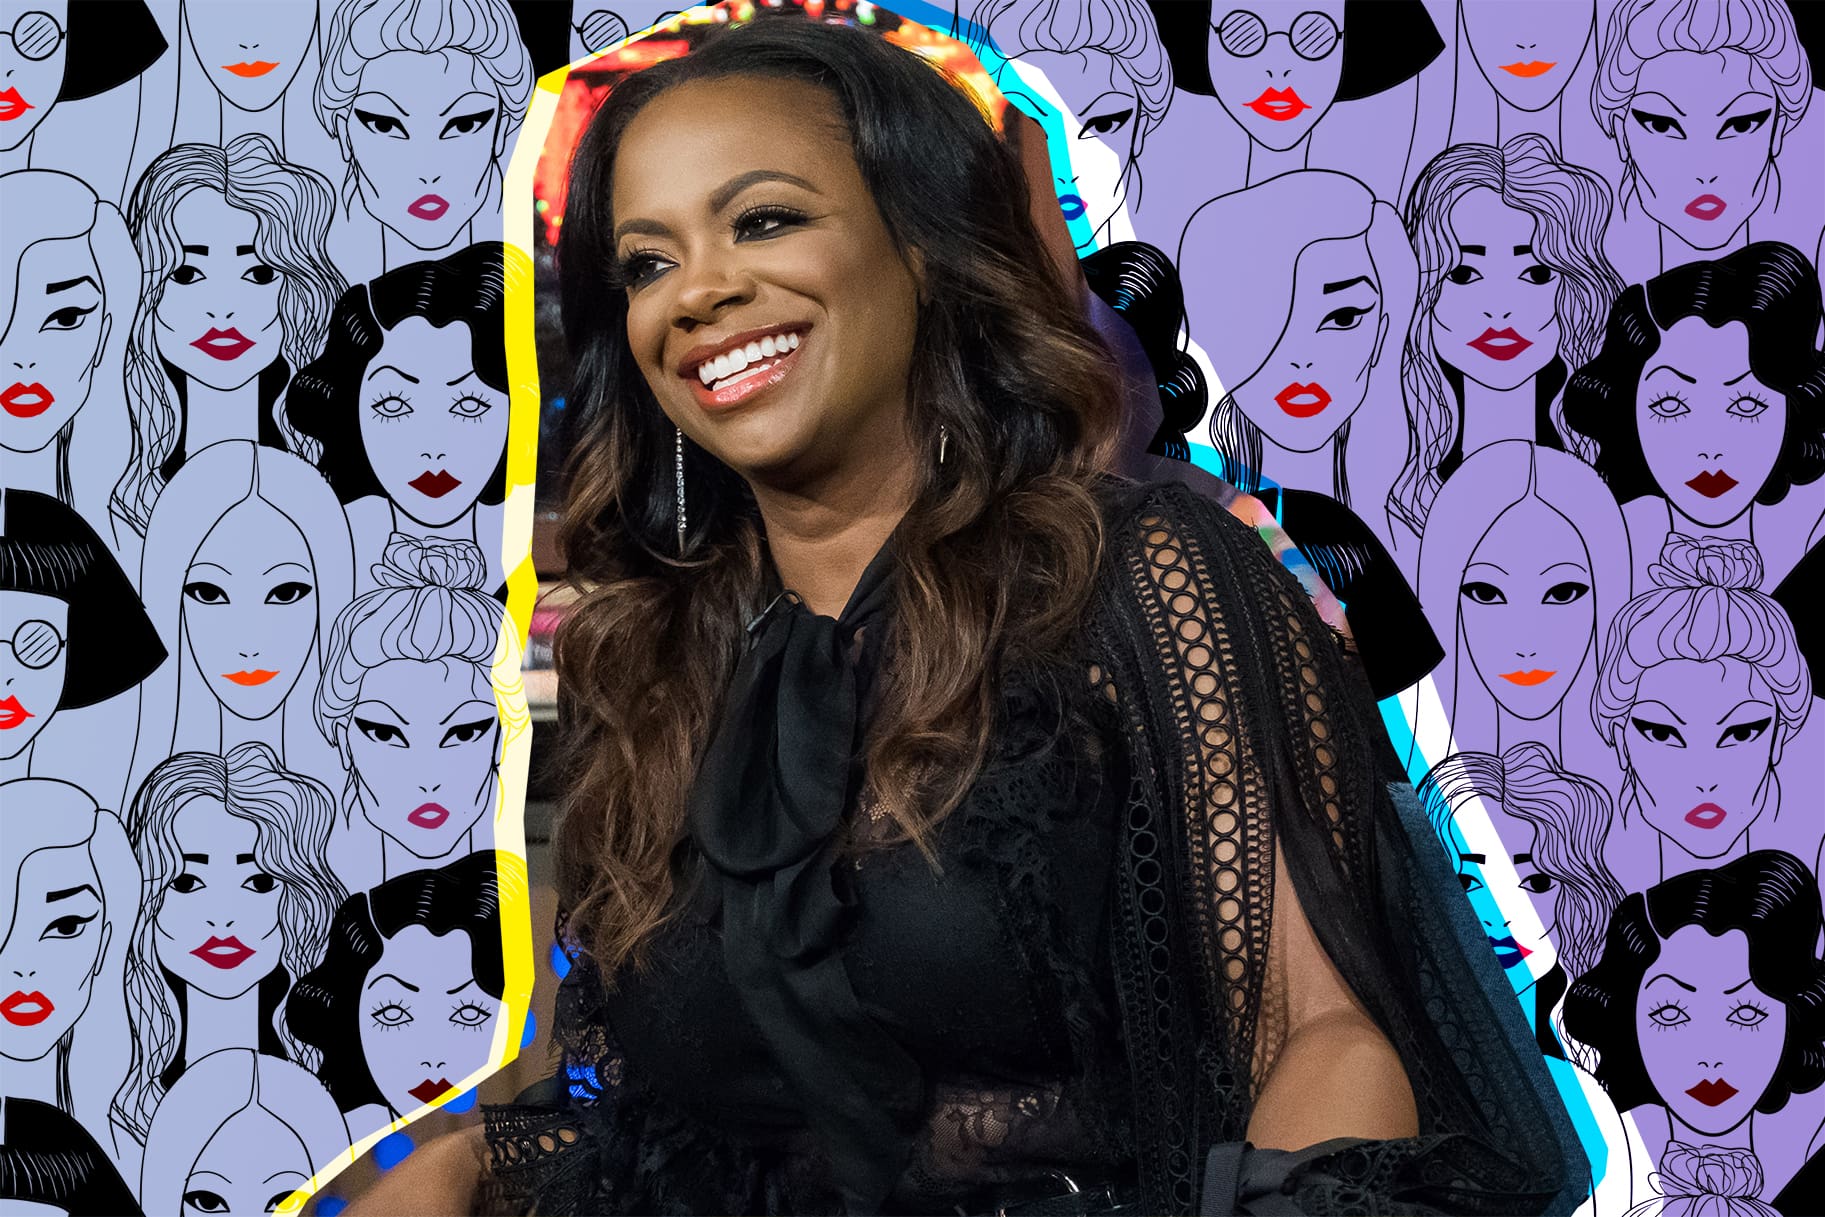 Kandi Burruss Does Her Makeup Using The Kandi Koated Cosmetics Line And Fans Are Here For It